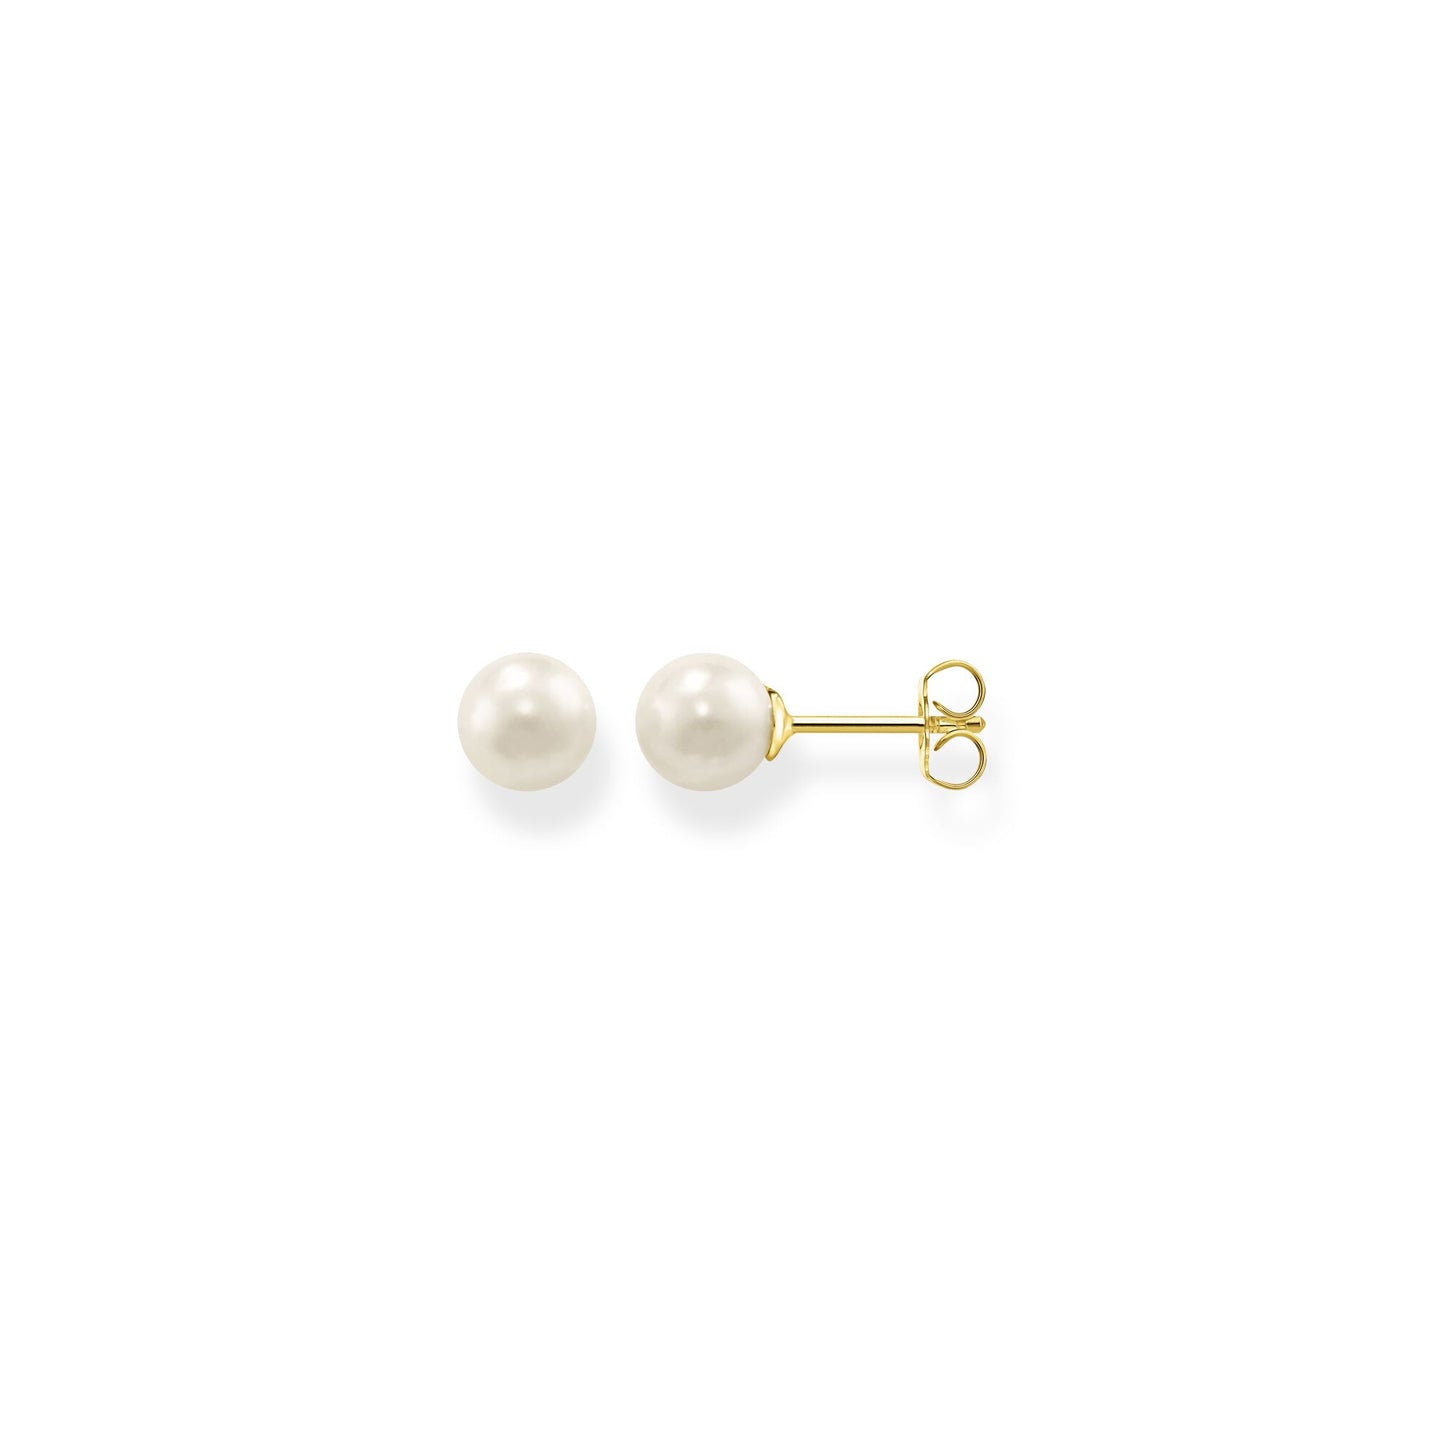 STERLING SILVER YELLOW GOLD PLATED WHITE FRESHWATER PEARL STUD EARRINGS